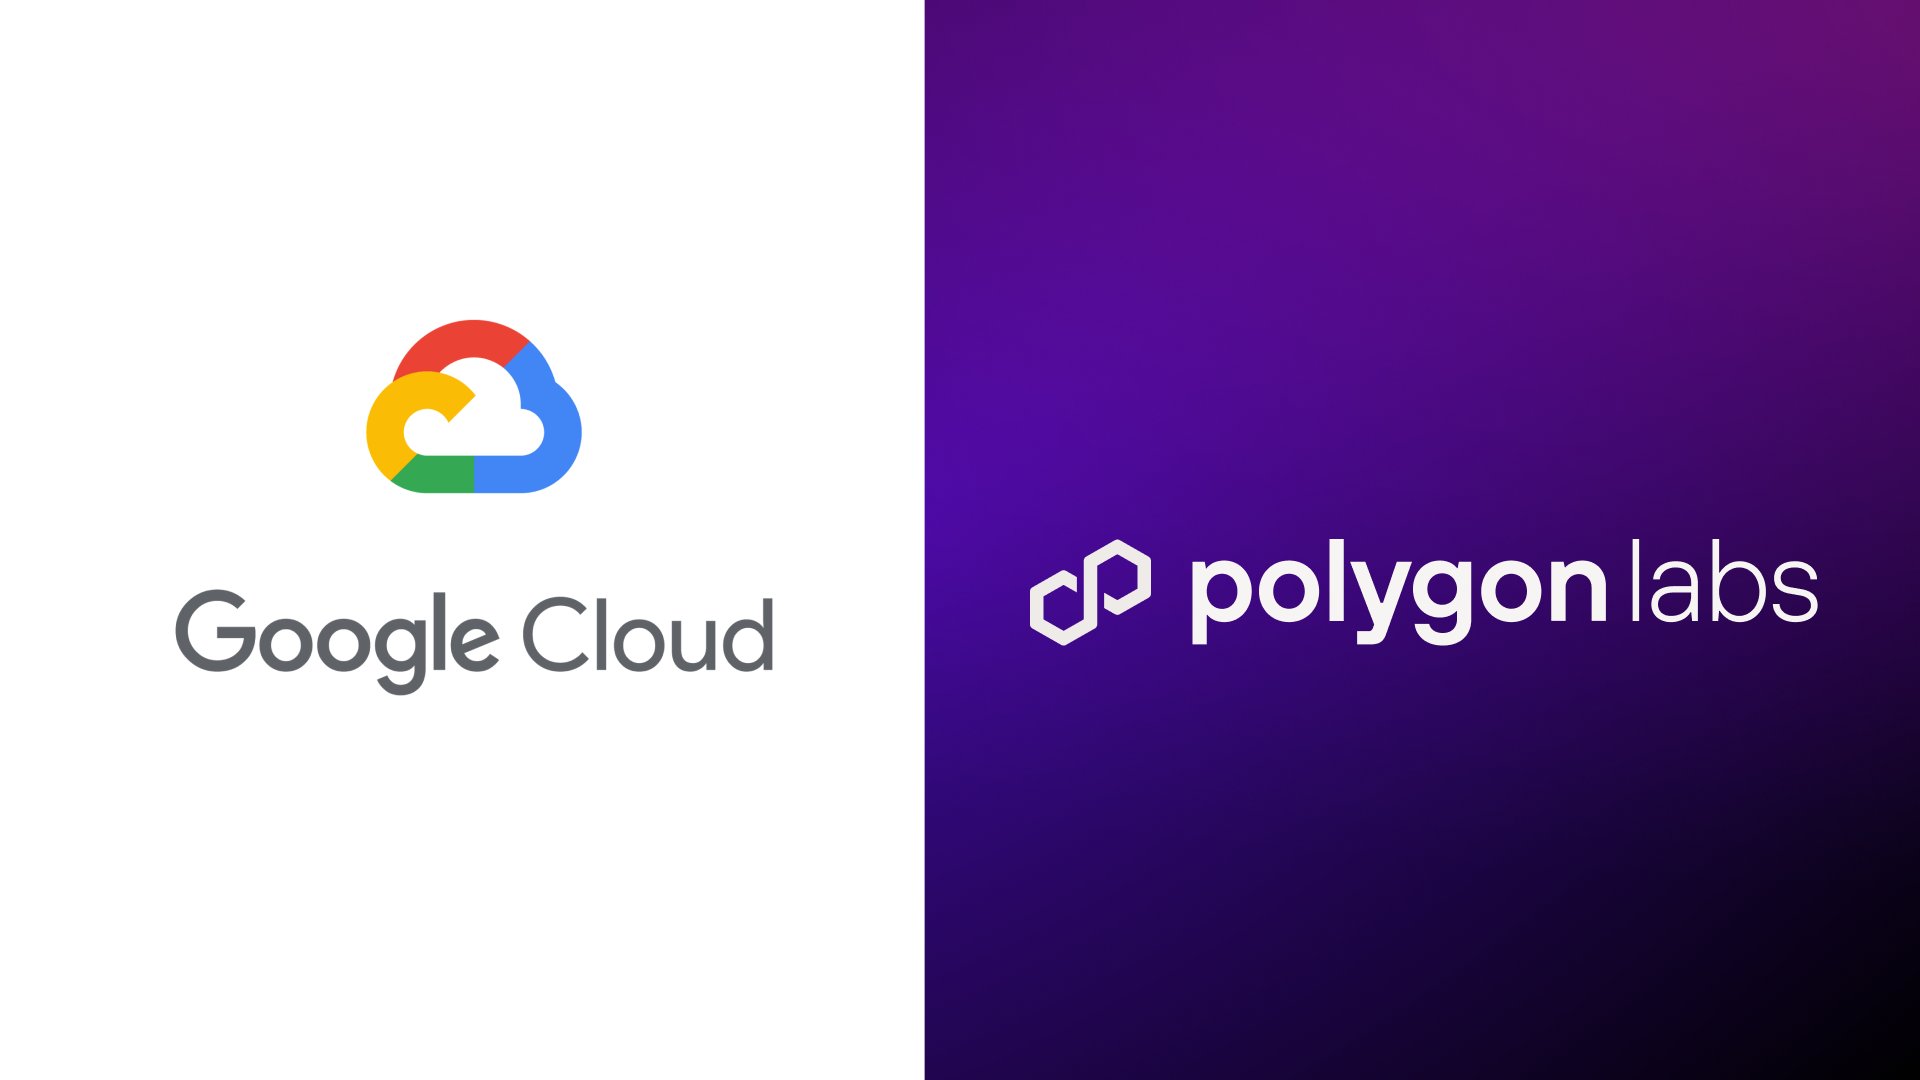 Google Cloud and Polygon Labs Announce Strategic Partnership to Boost Blockchain Industry